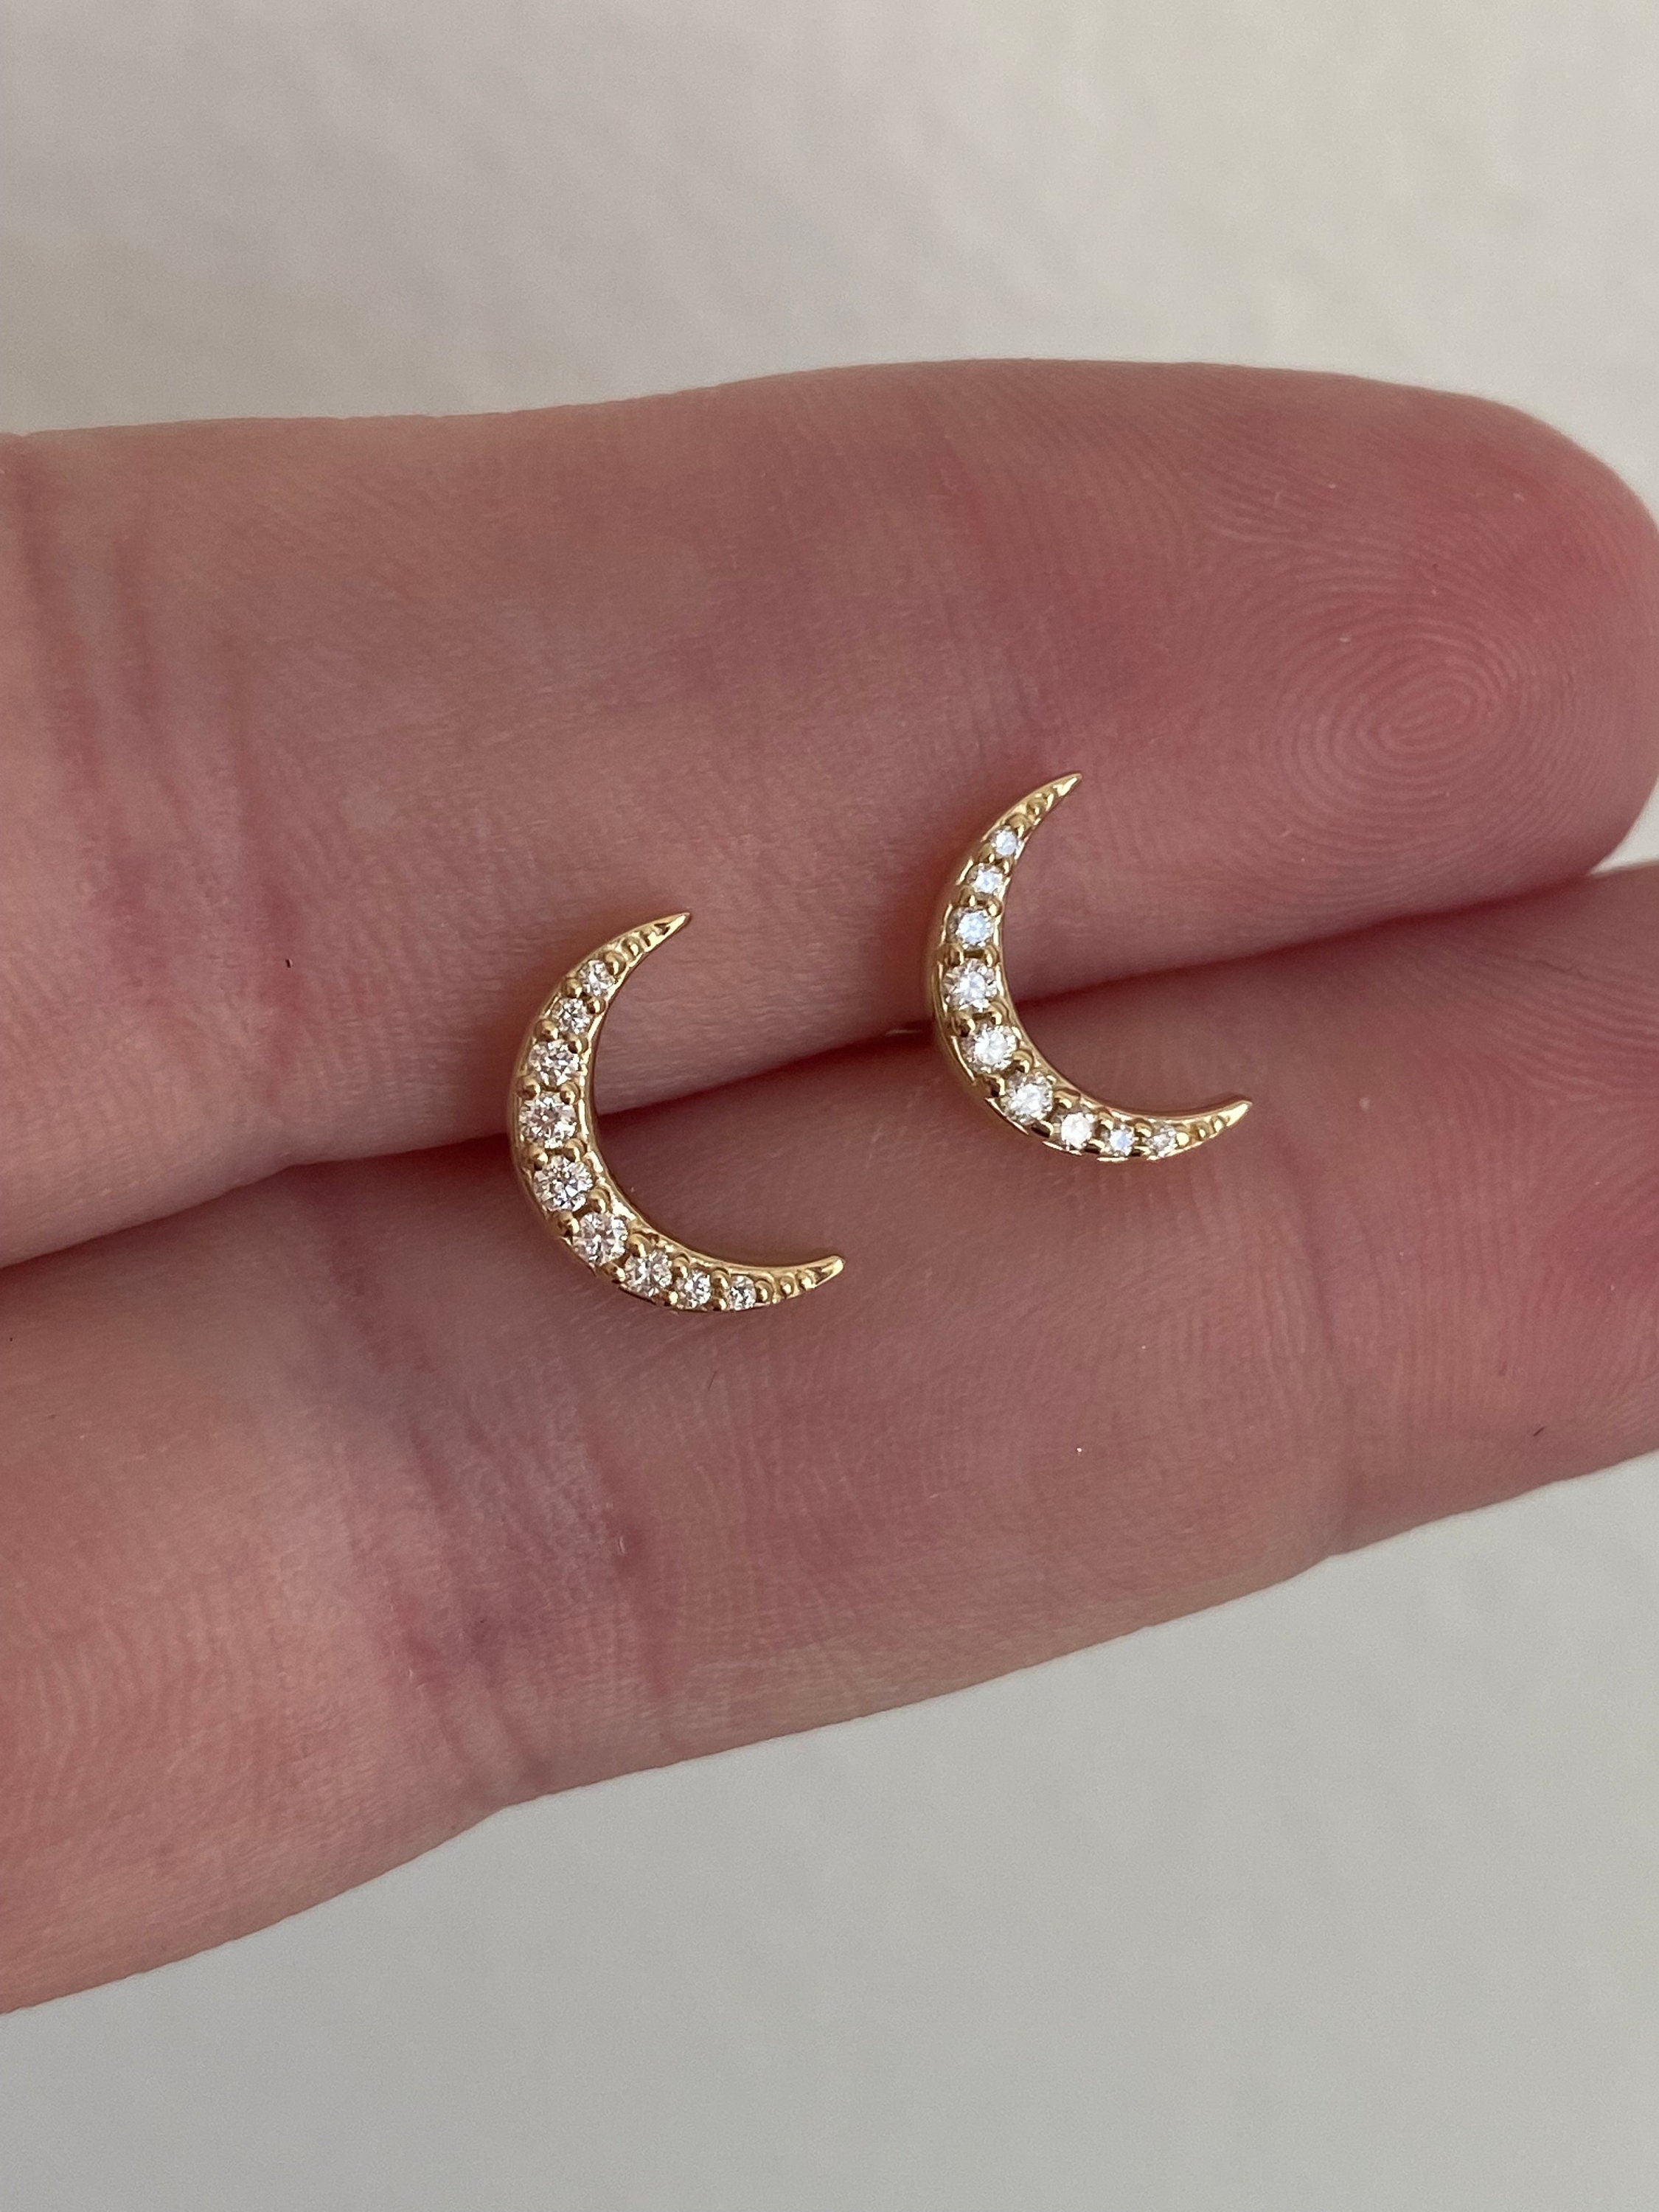 Crescent Moon Diamond Stud Earrings in Solid 14K Gold - White.